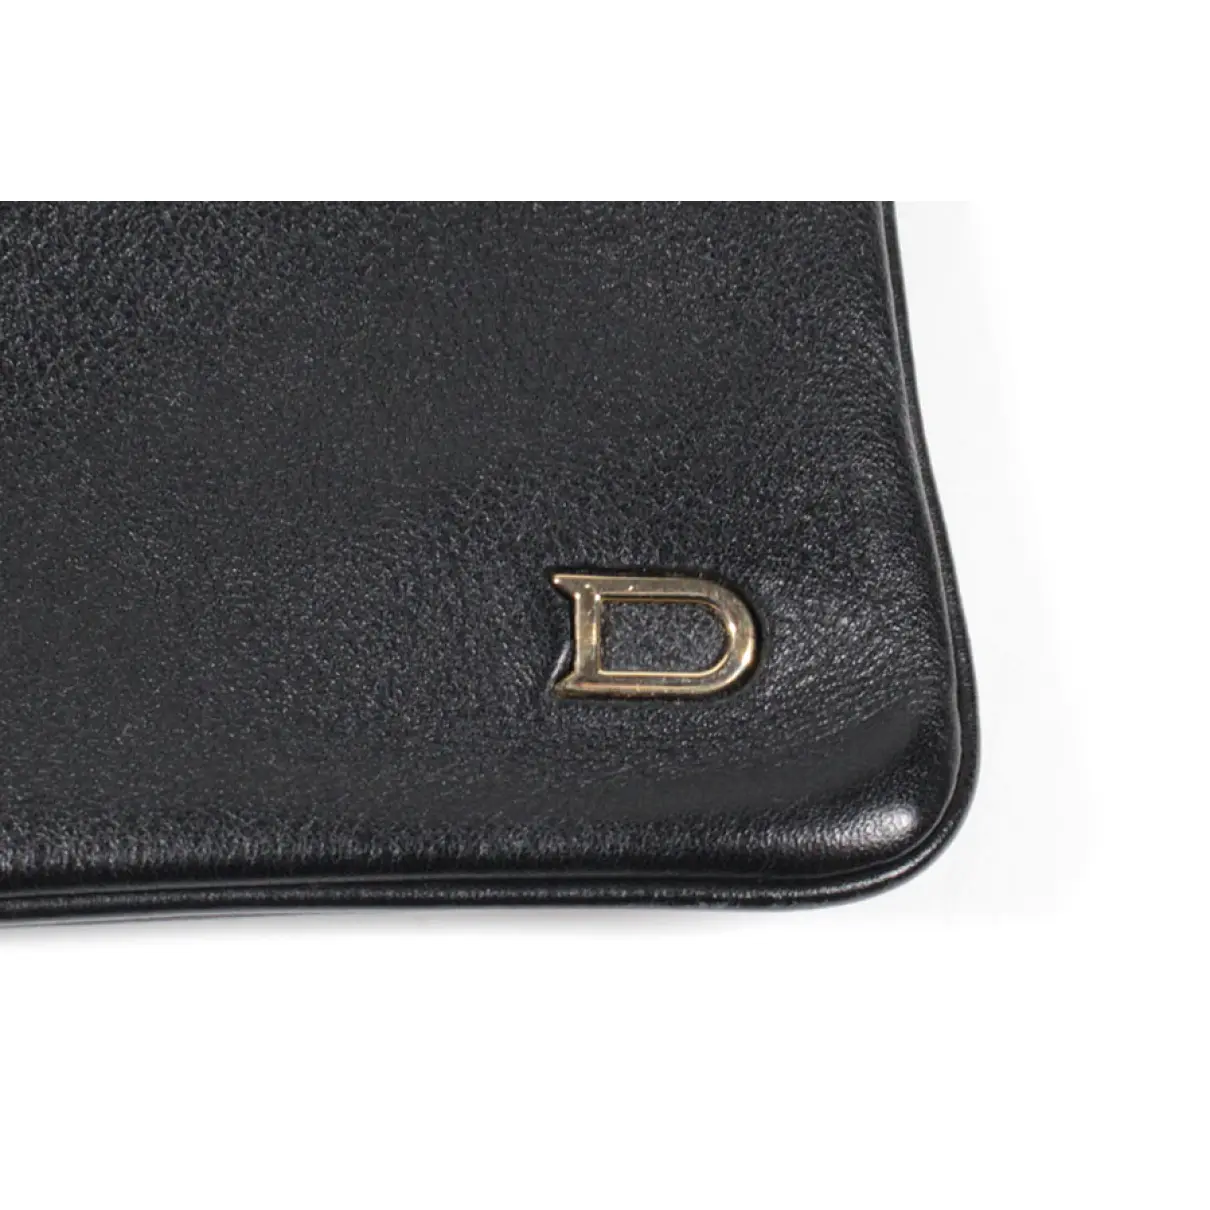 Leather clutch bag Delvaux